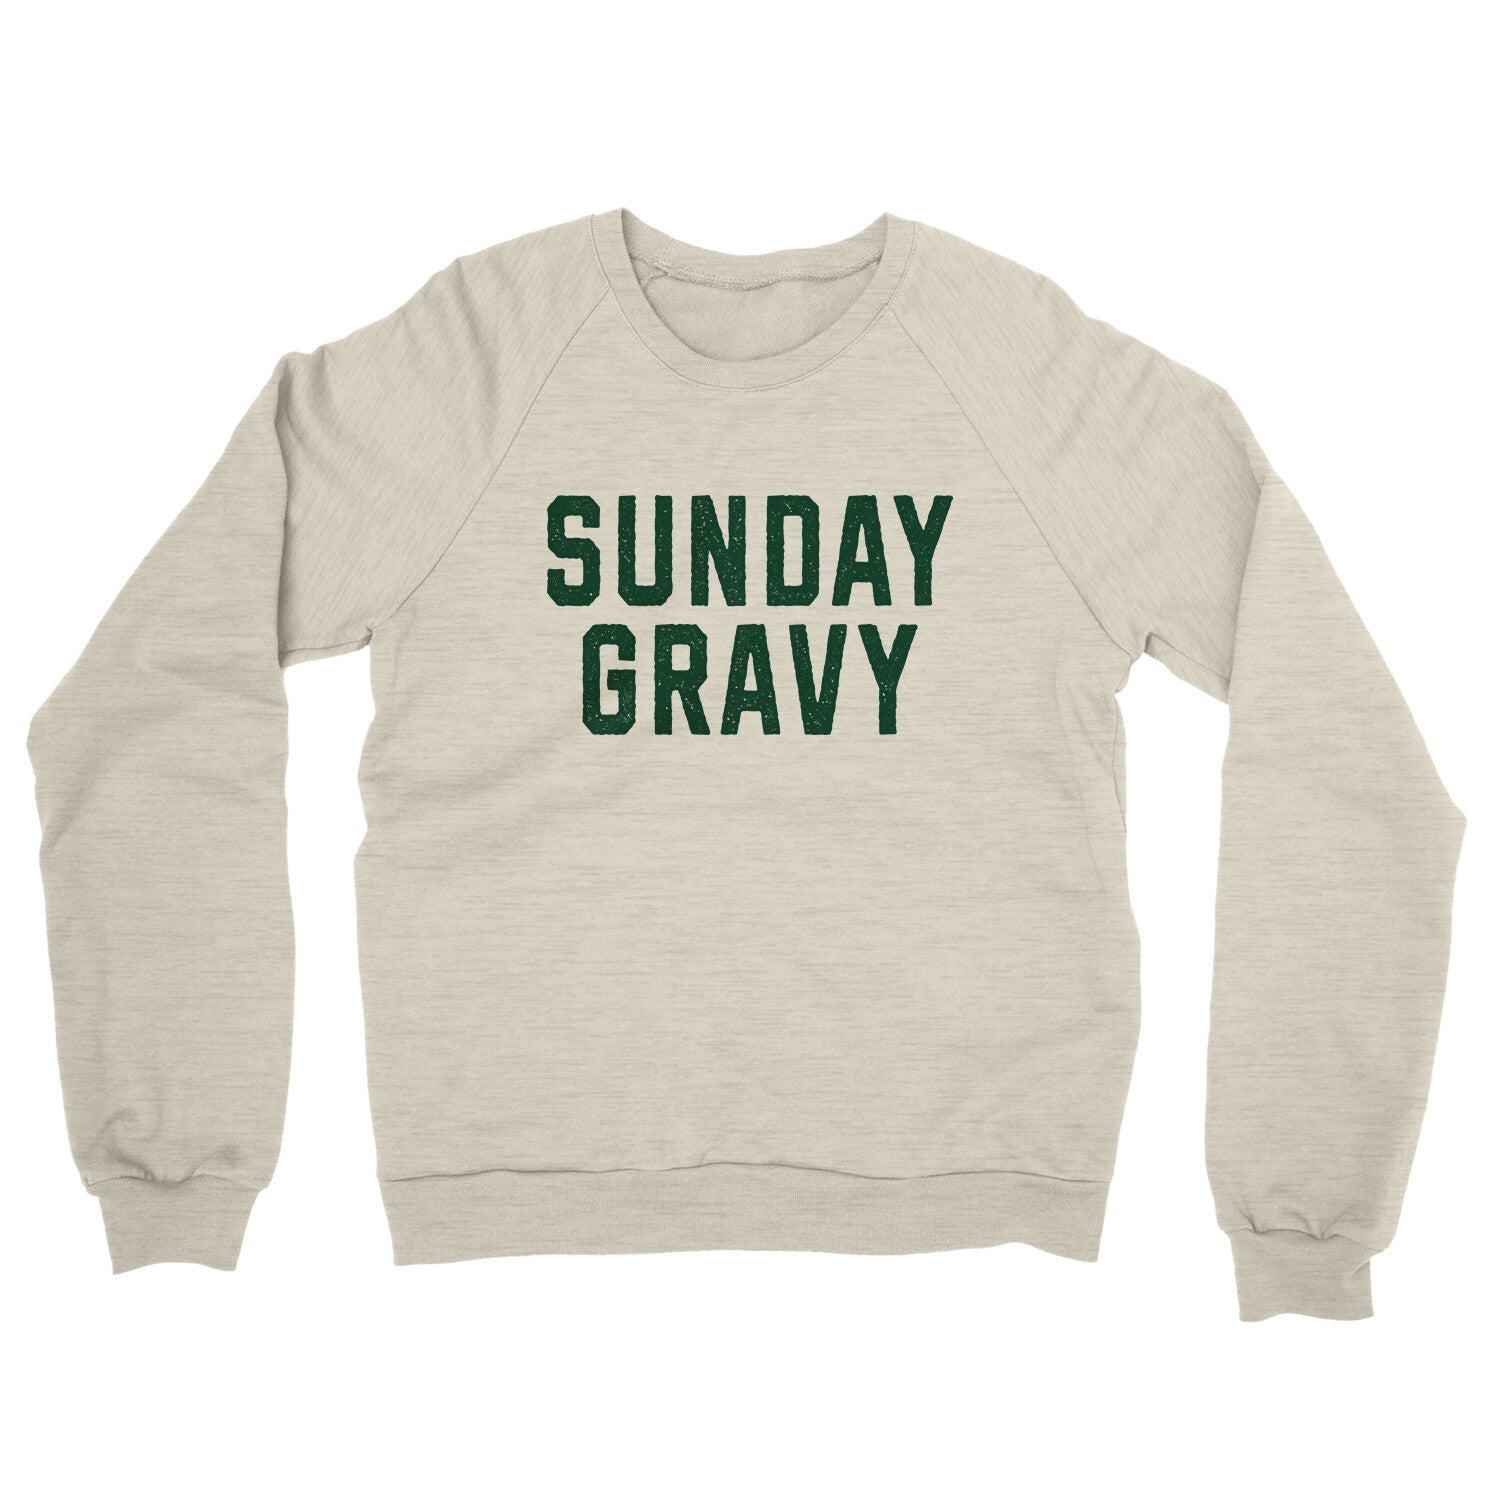 Sunday Gravy in Heather Oatmeal Color